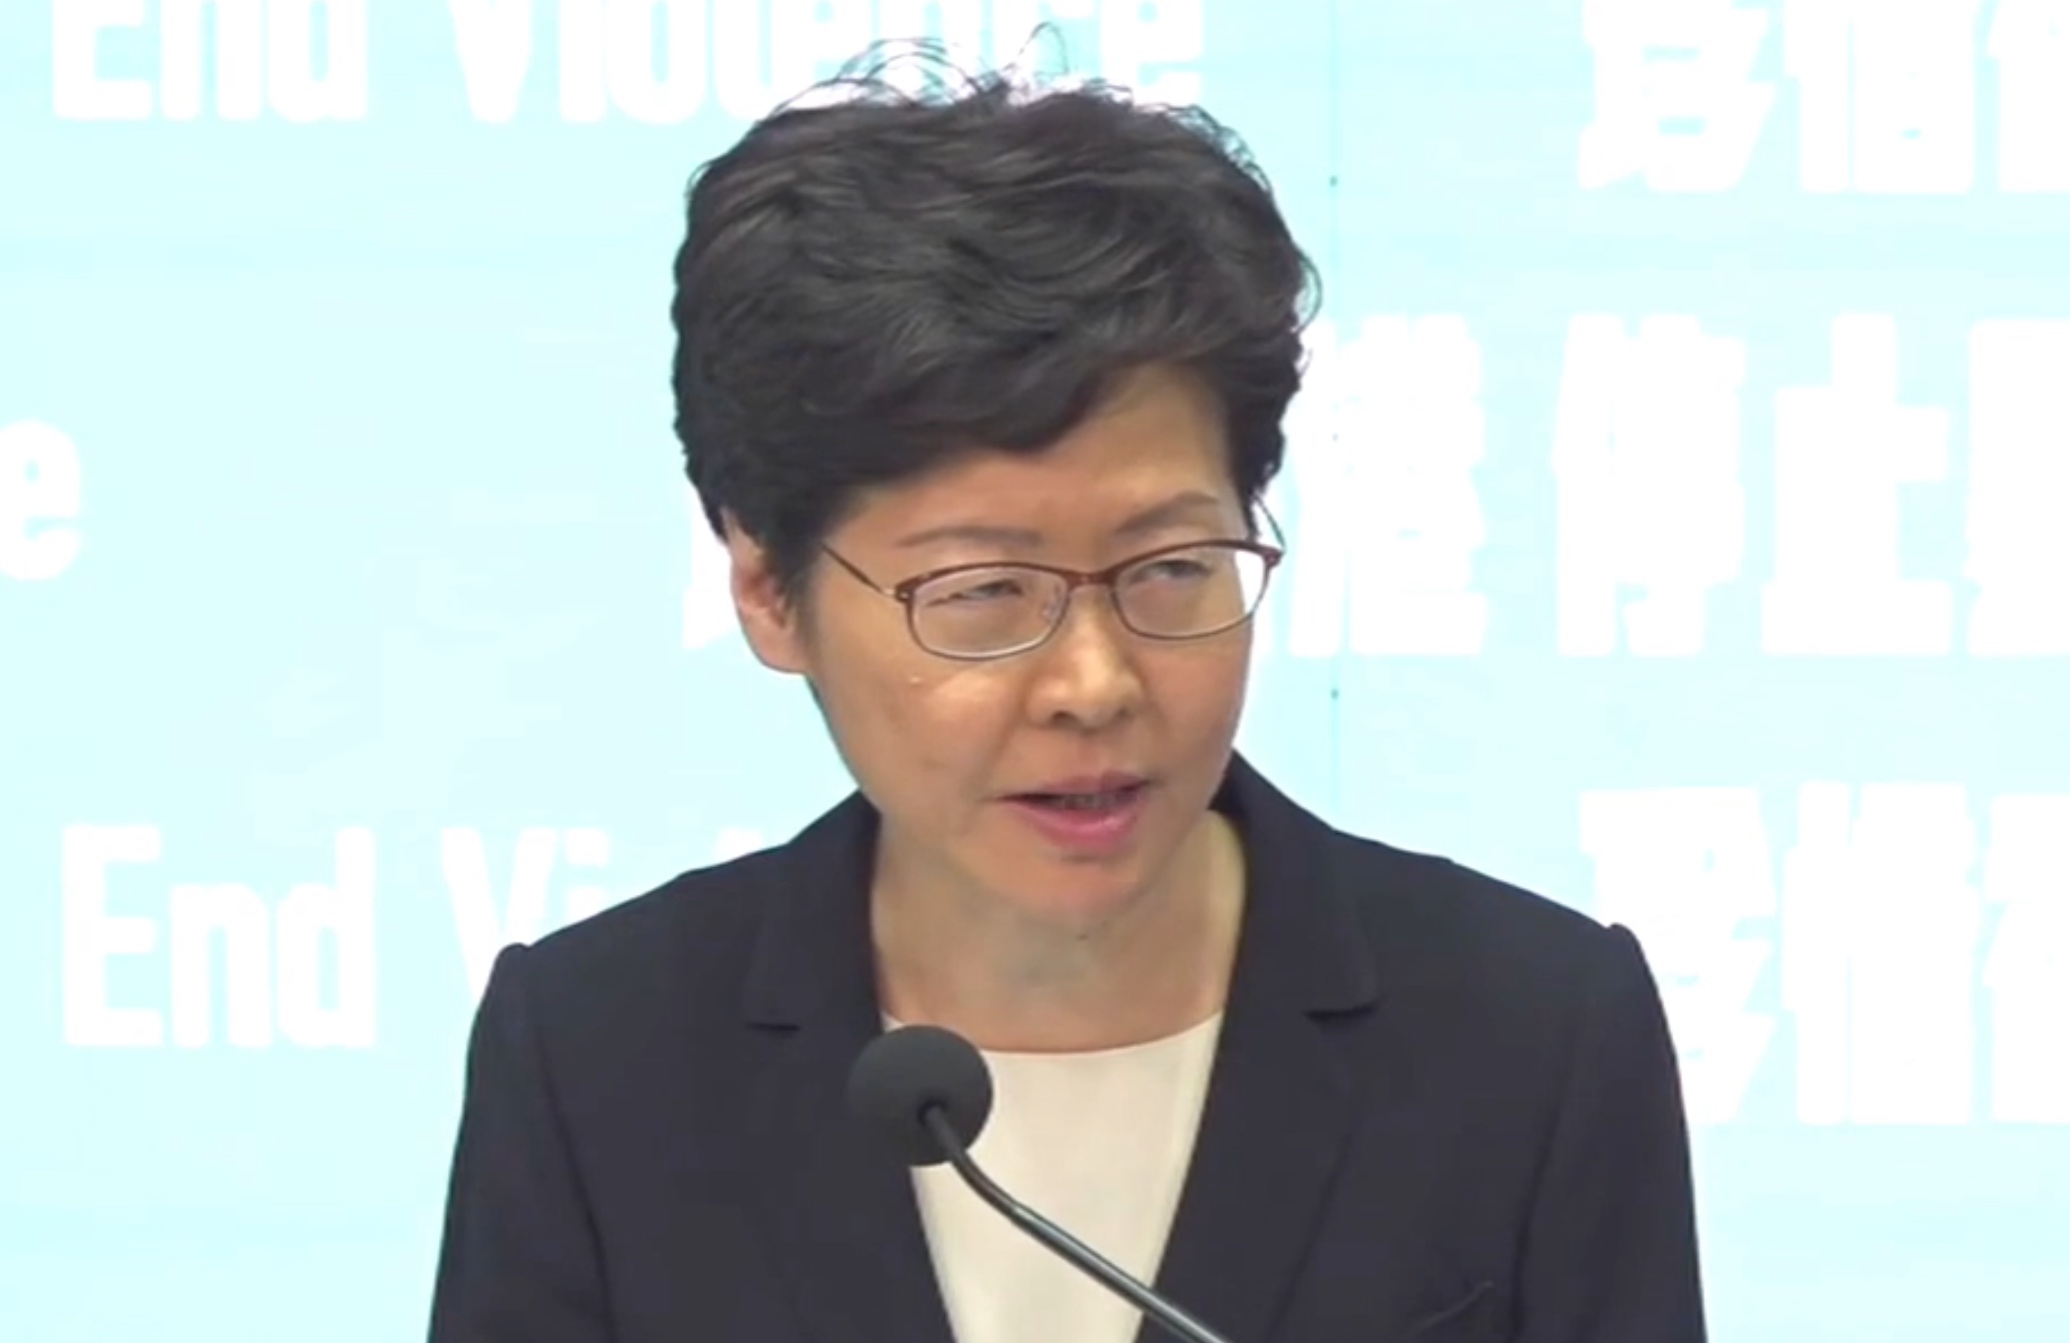 Chief Executive Carrie Lam announces the implementation of a controversial ban on face masks aimed at clamping down on protests at a press conference today. Screengrab via Facebook/HK01.